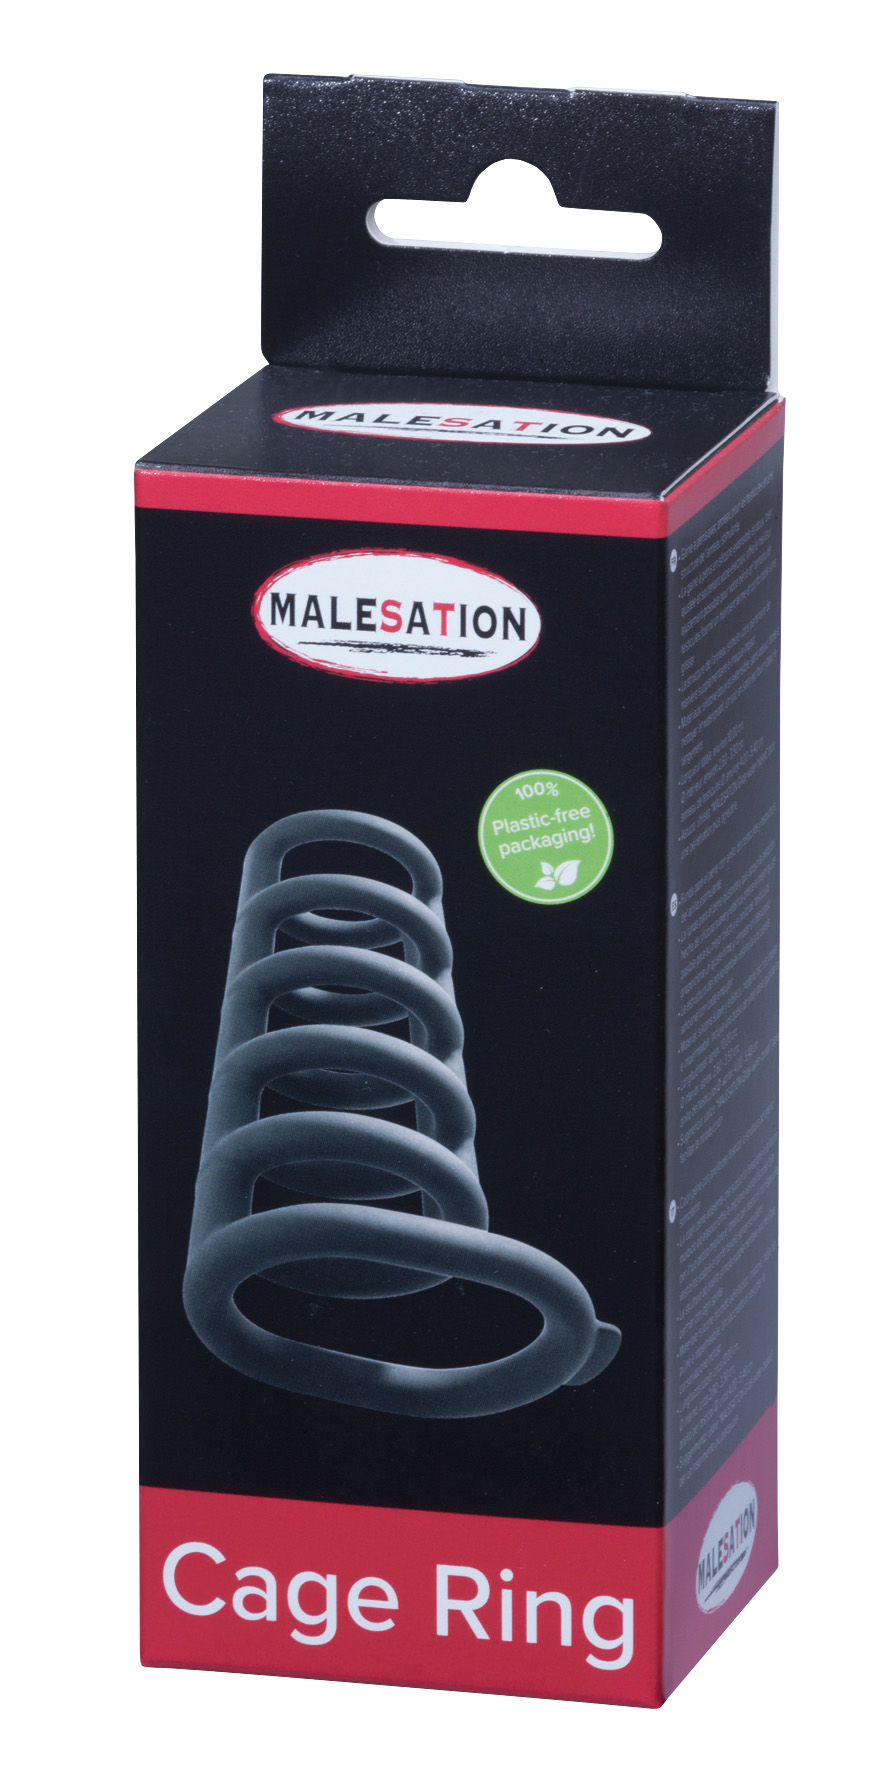 MALESATION Cage Ring